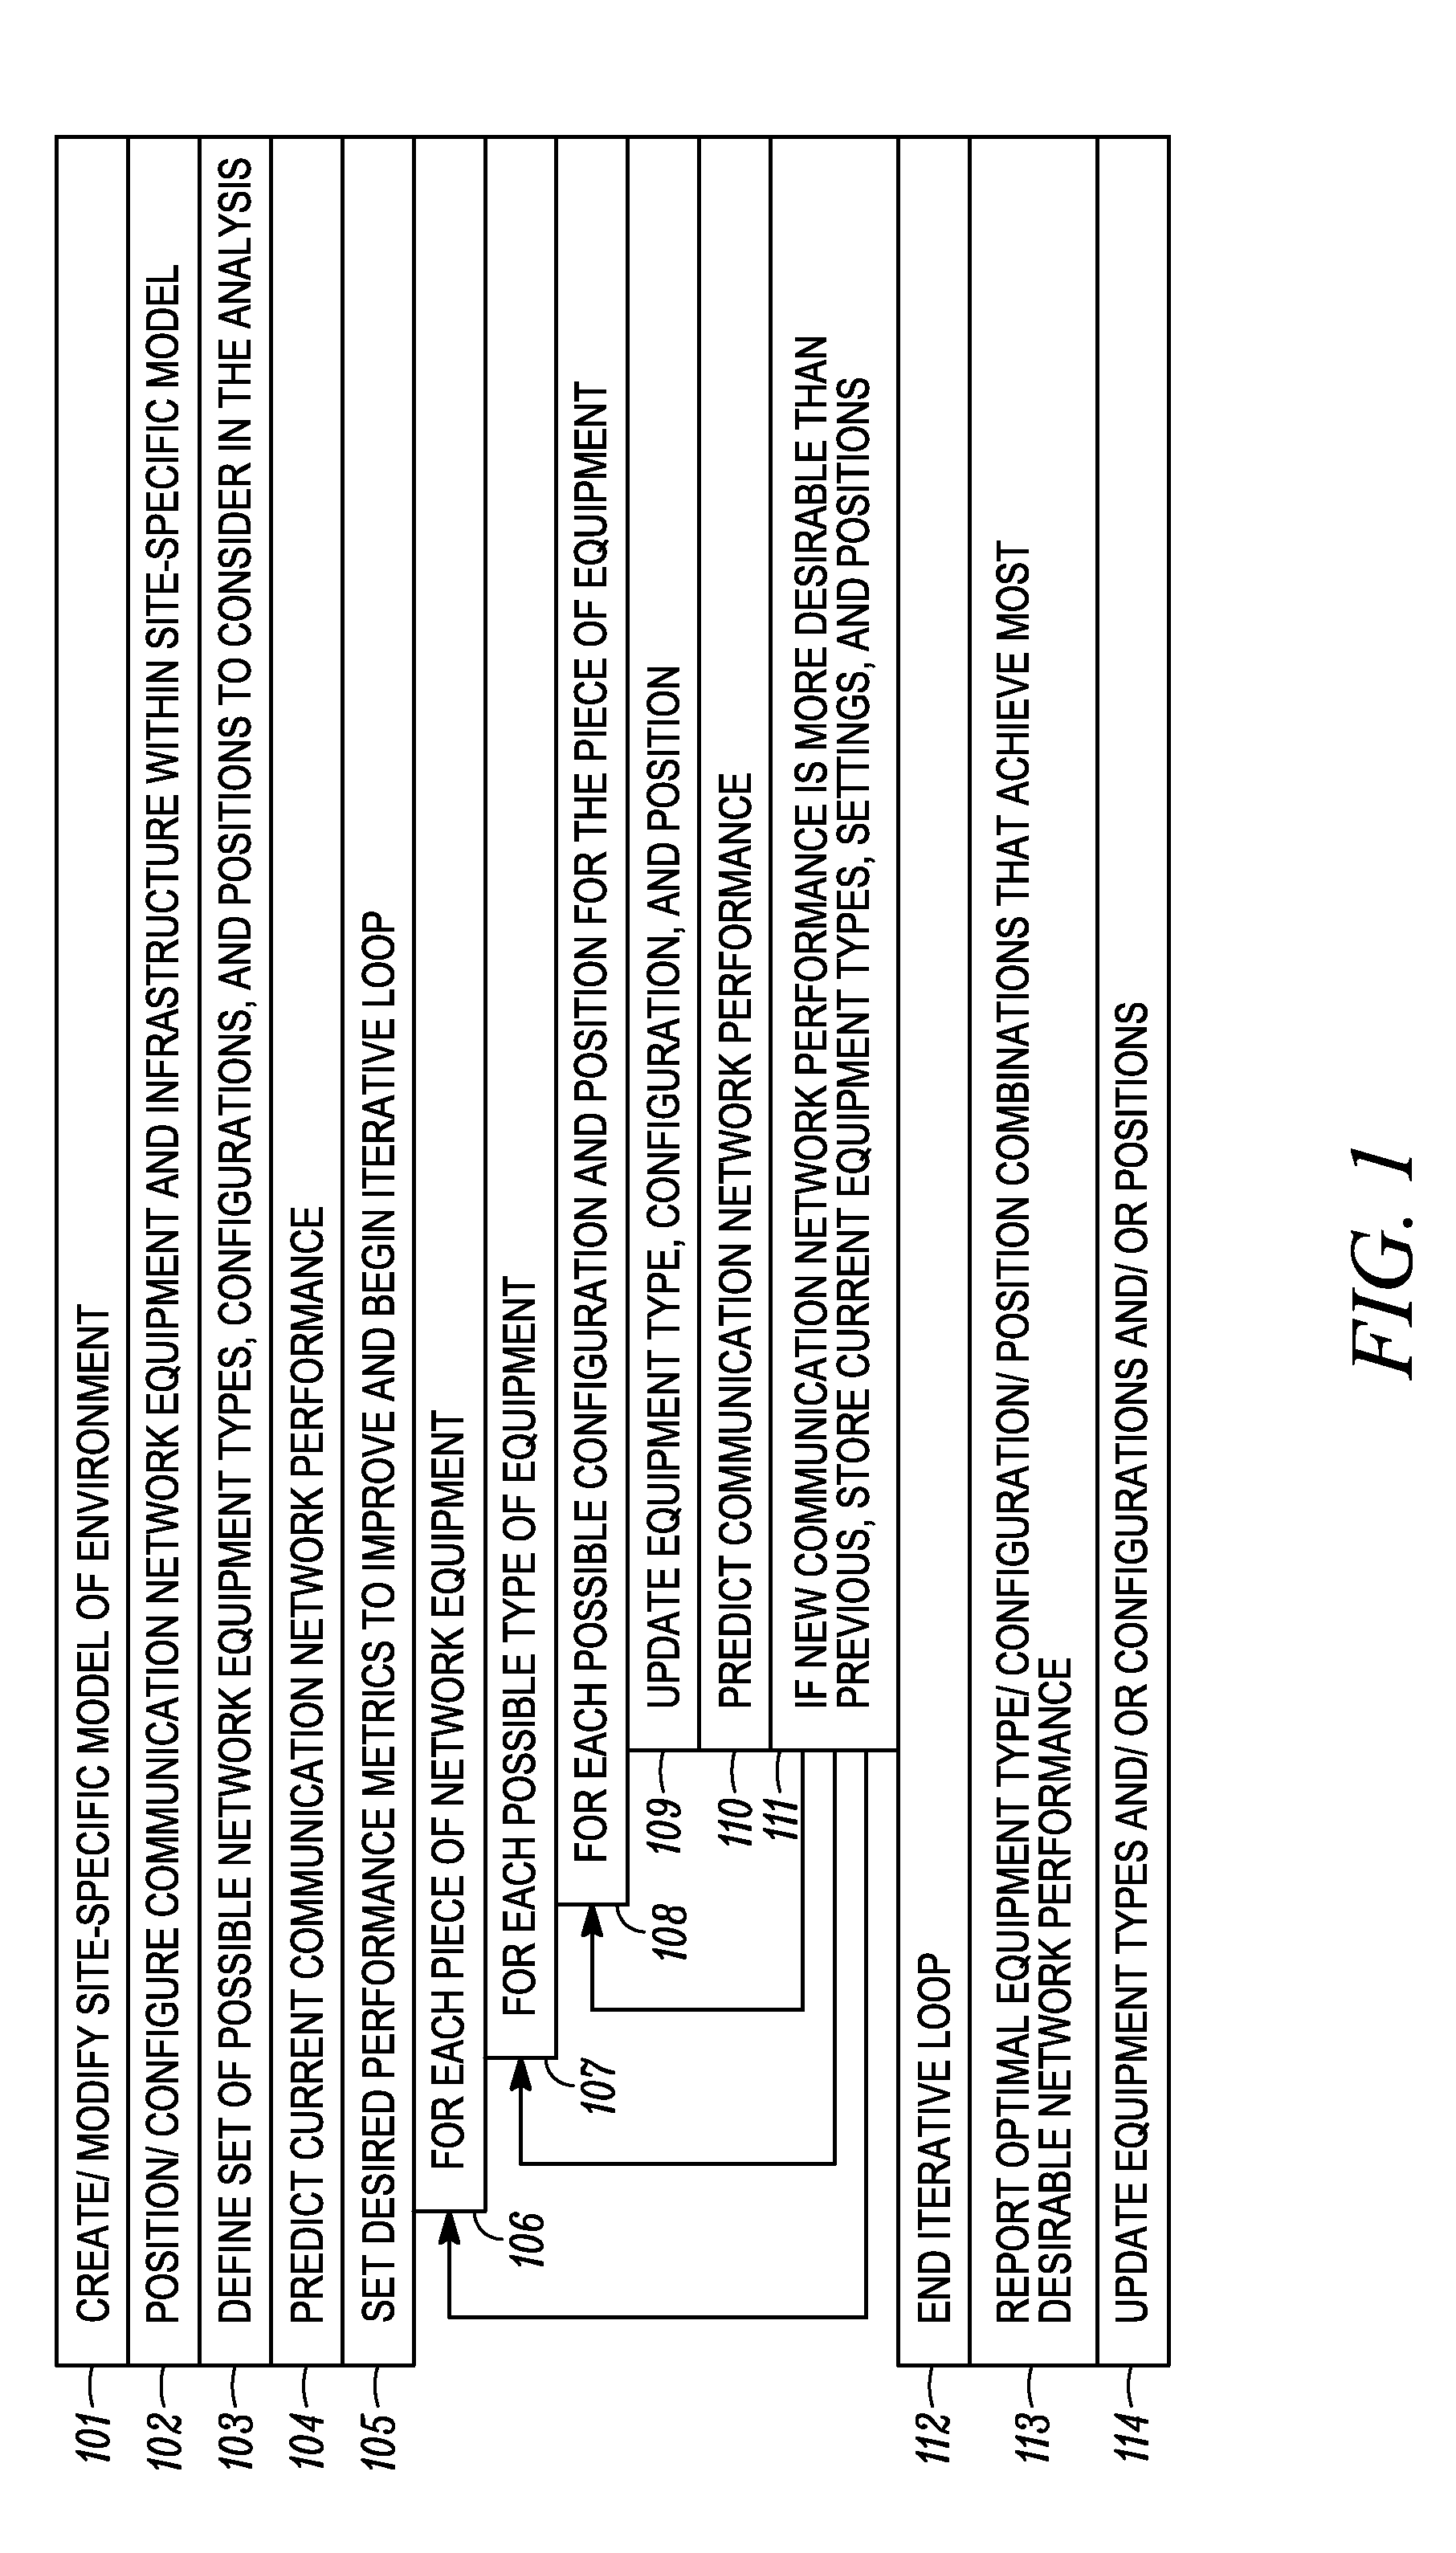 System and method for automated placement or configuration of equipment for obtaining desired network performance objectives